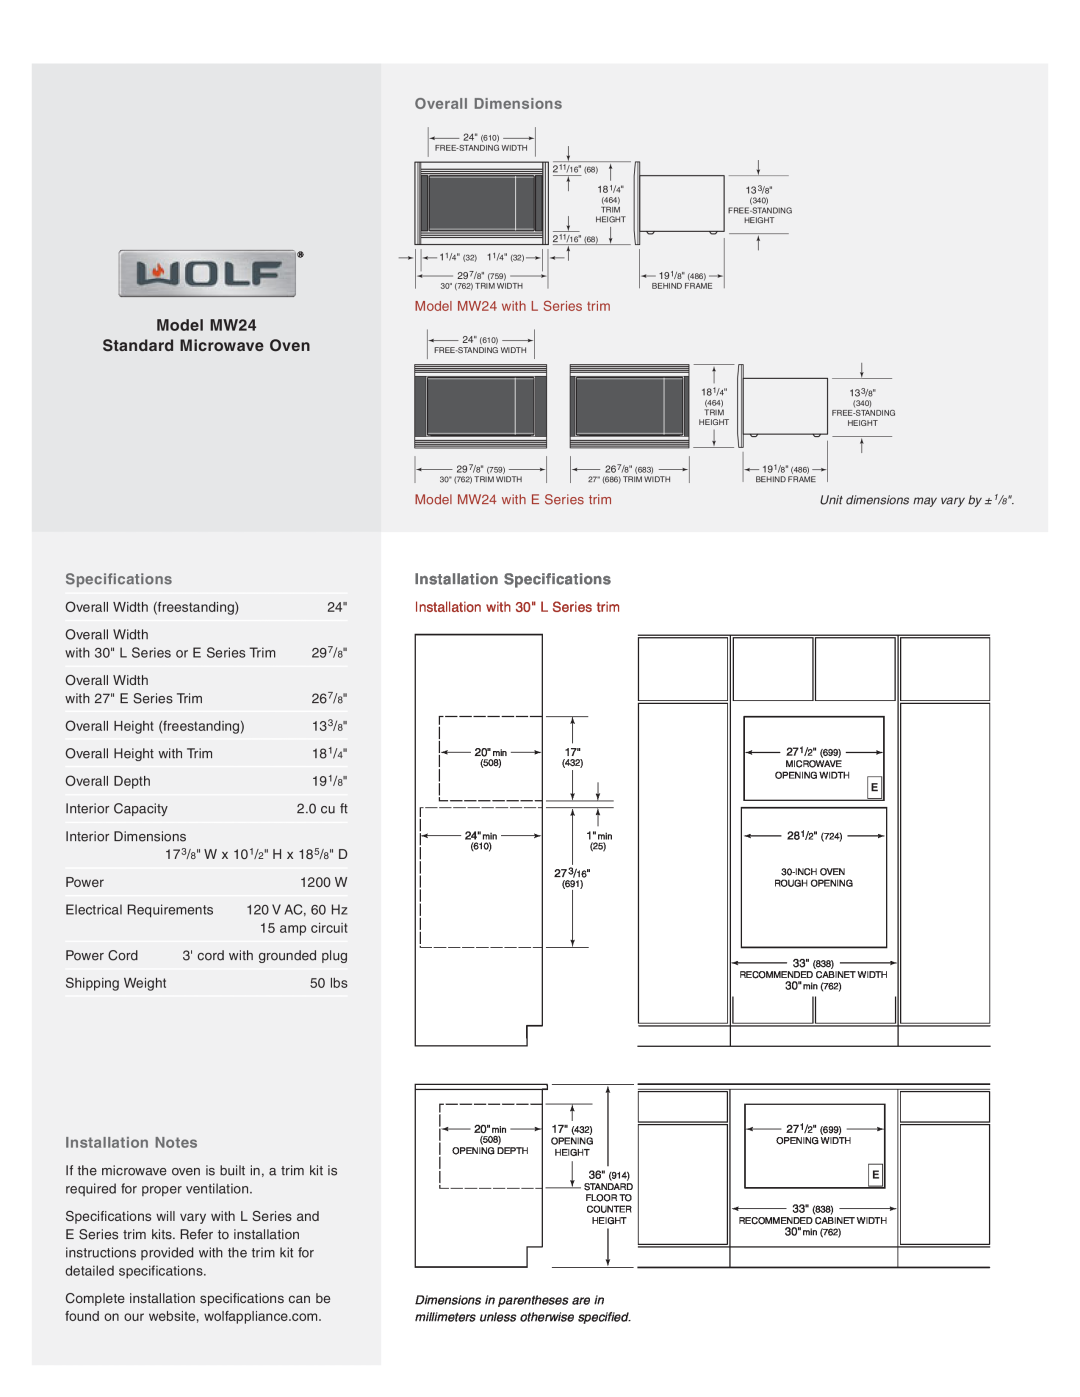 Wolf manual Overall Dimensions, Installation Notes, Installation Specifications, Model MW24 Standard Microwave Oven 